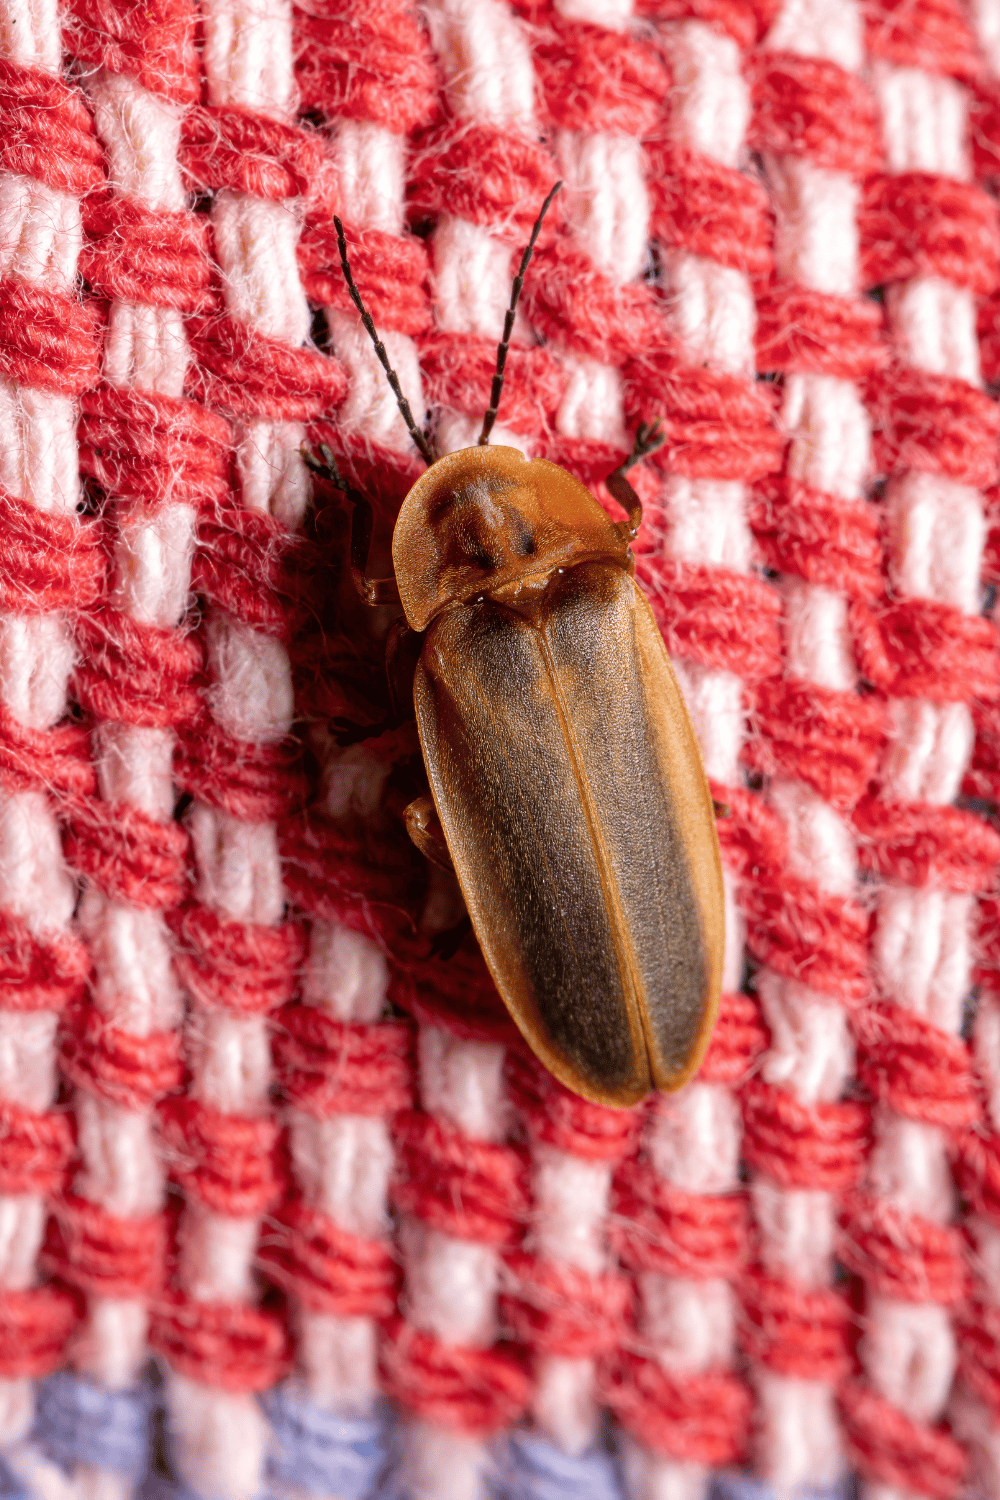 A black and yellow beetle on a red and white blanket